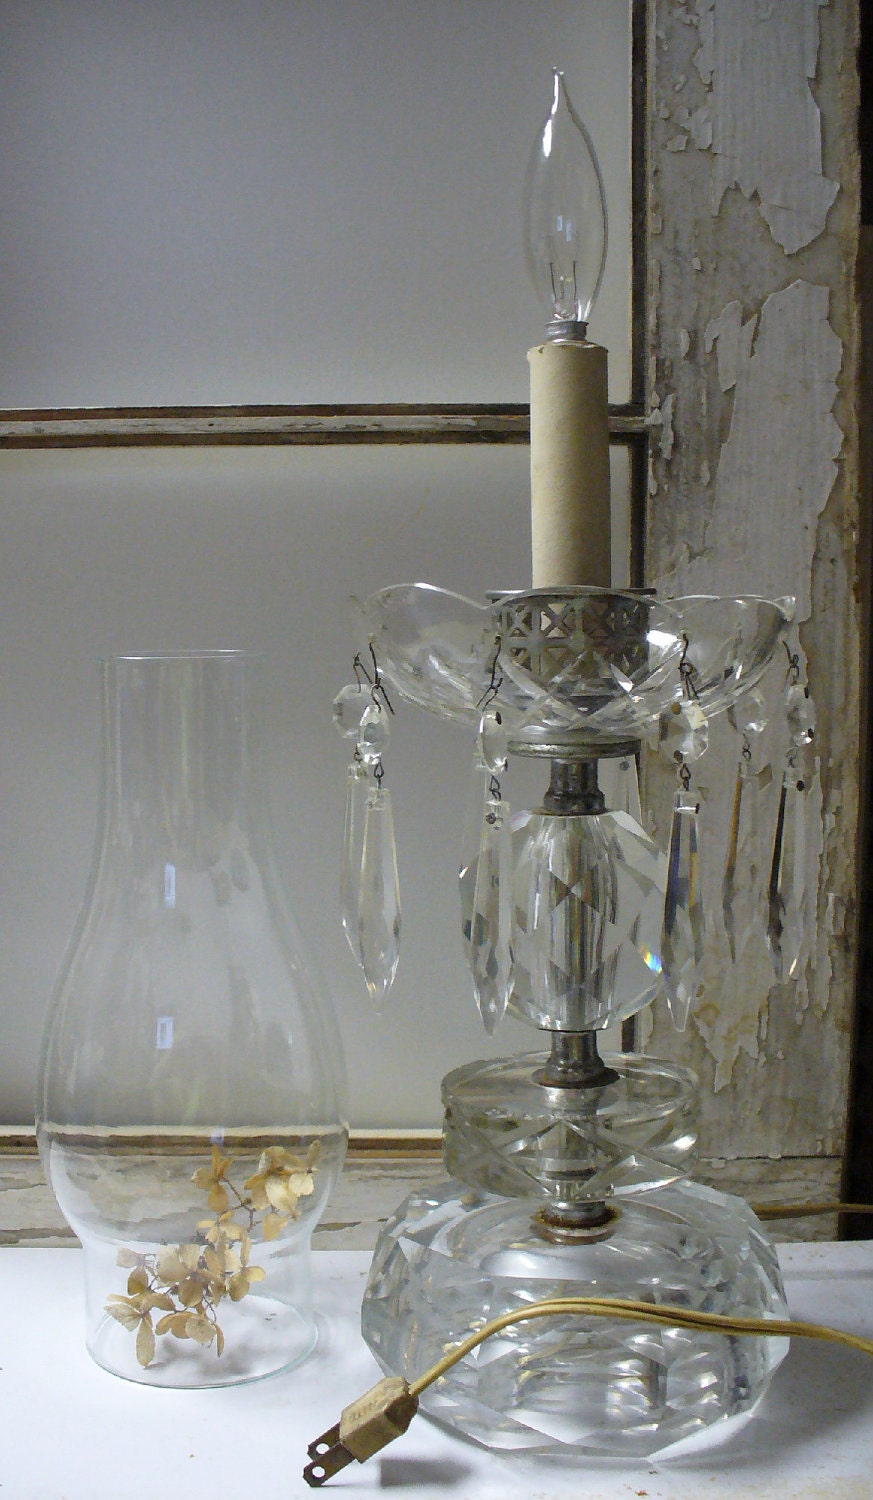 VINTAGE SHANNON CRYSTAL CANDLE LAMP HOLDER BY ENERGYFORTHESOUL